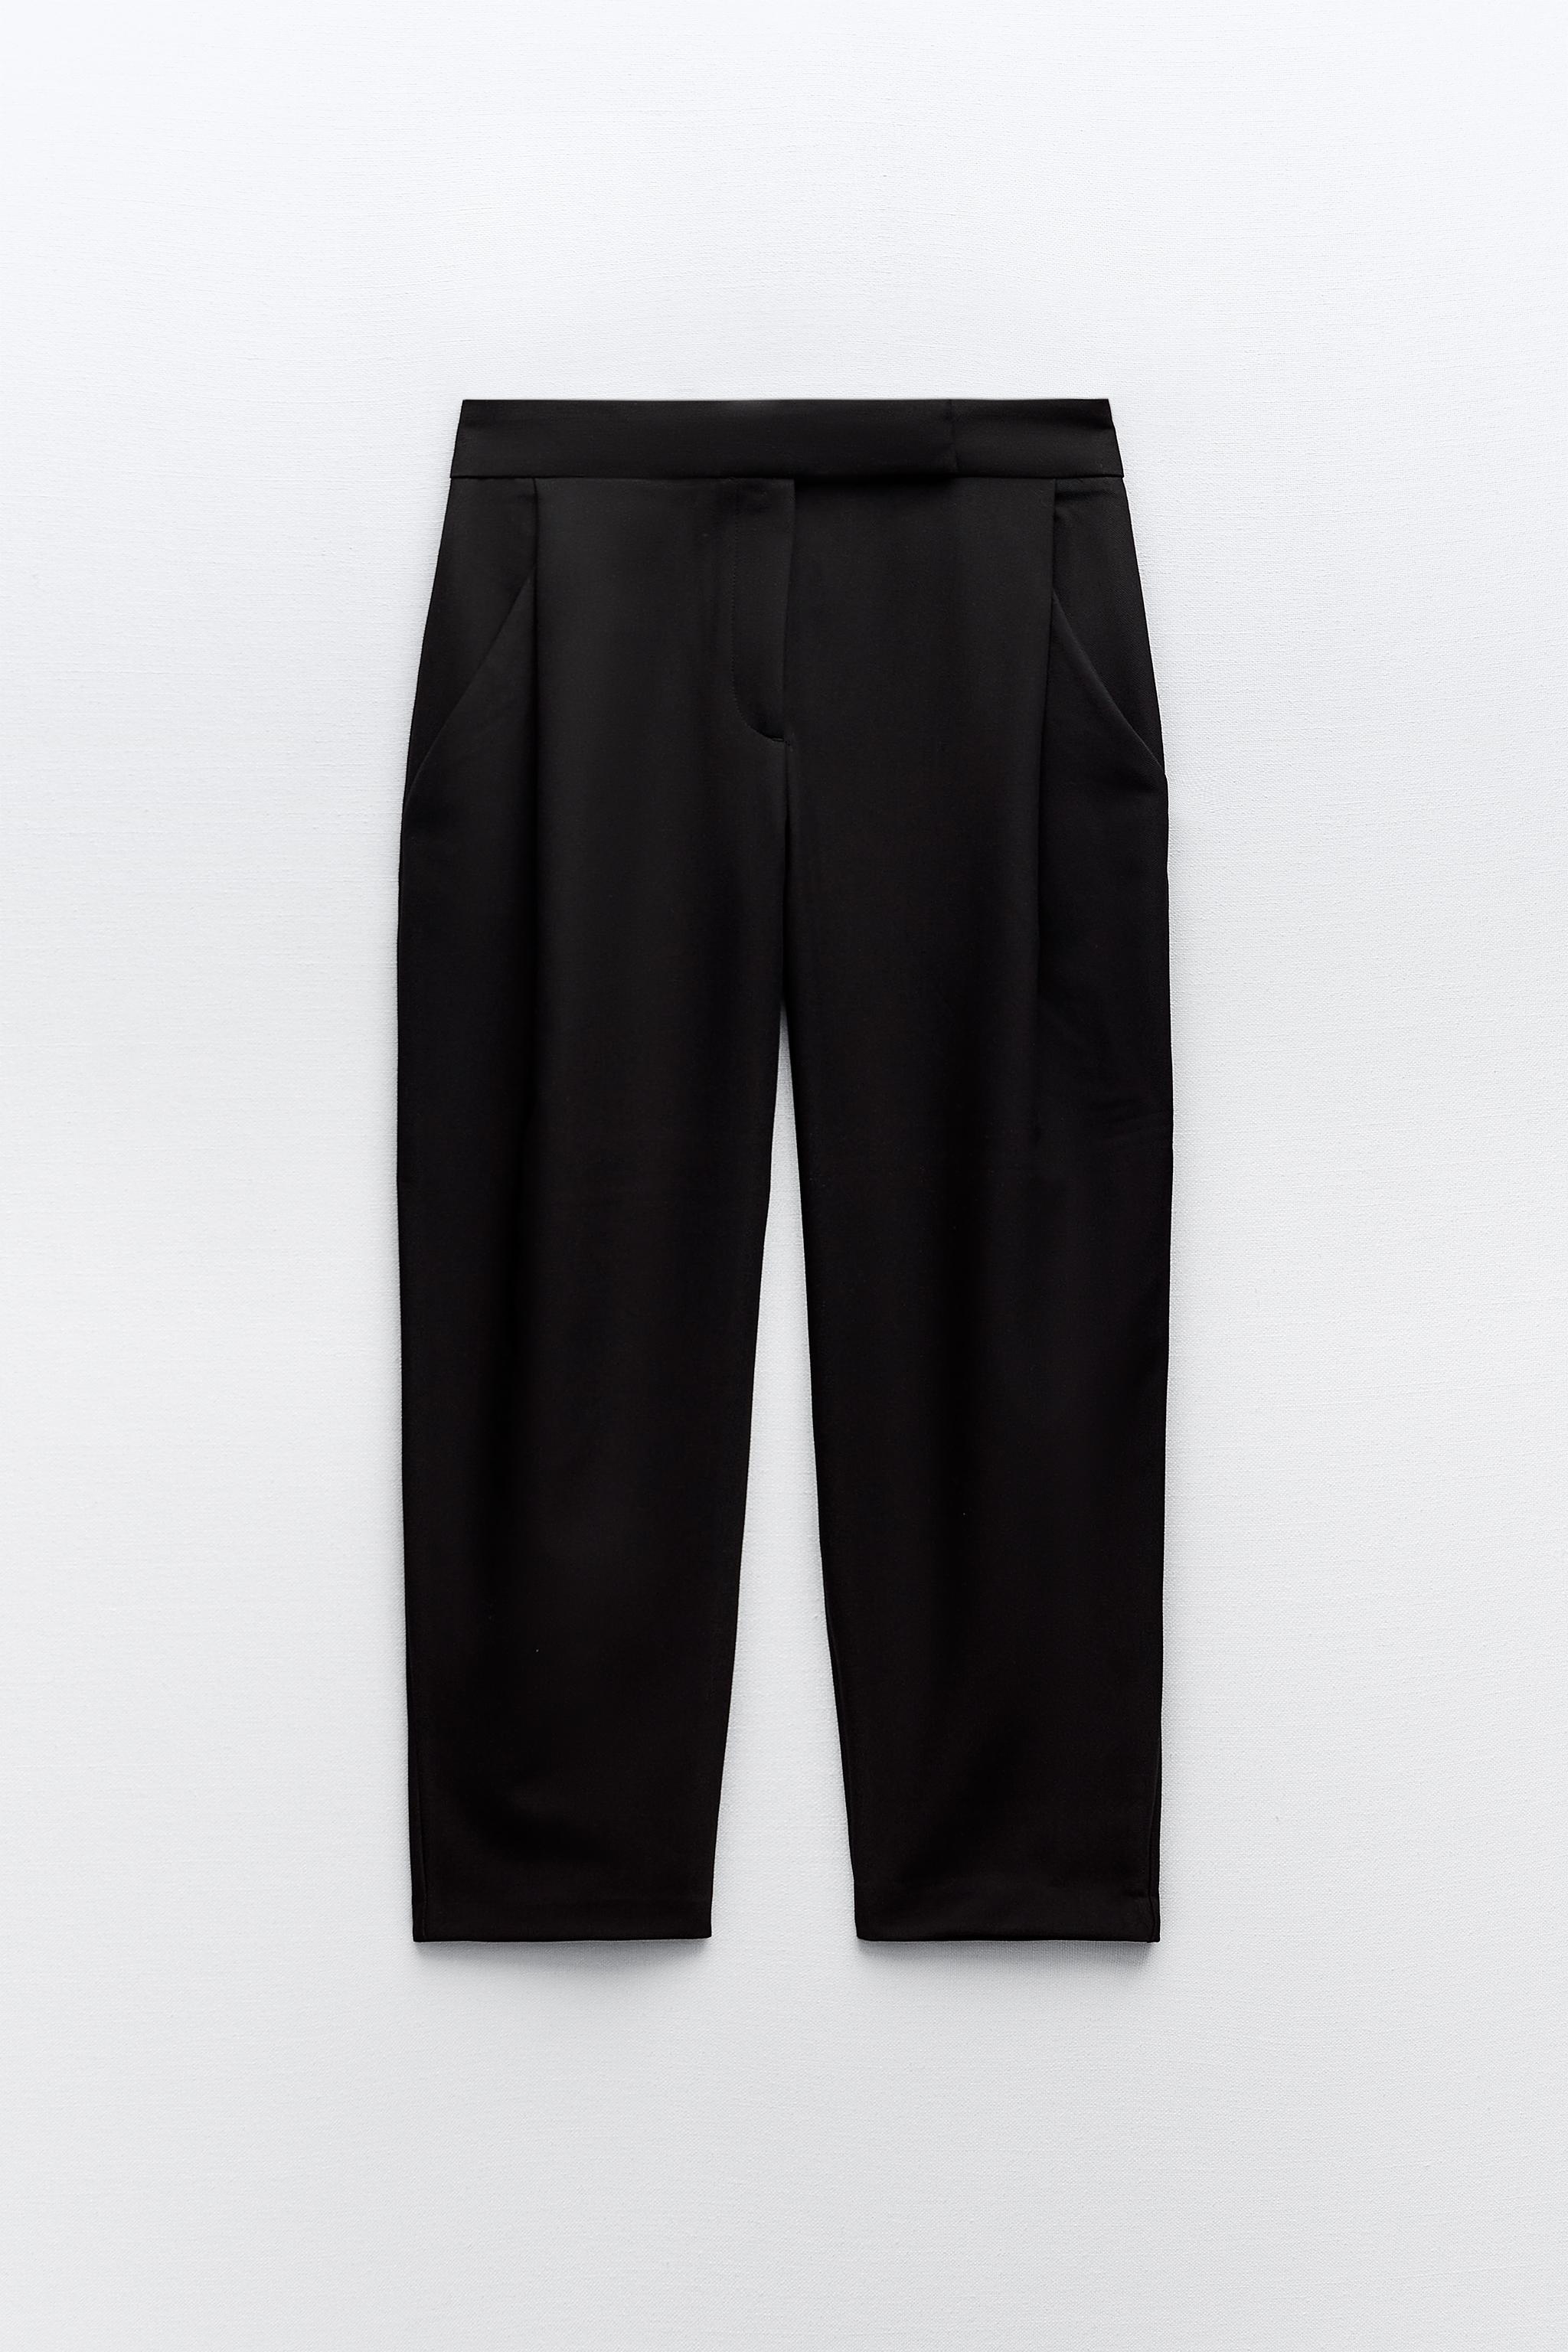 FLARED POCKET PANTS ZW COLLECTION - Black